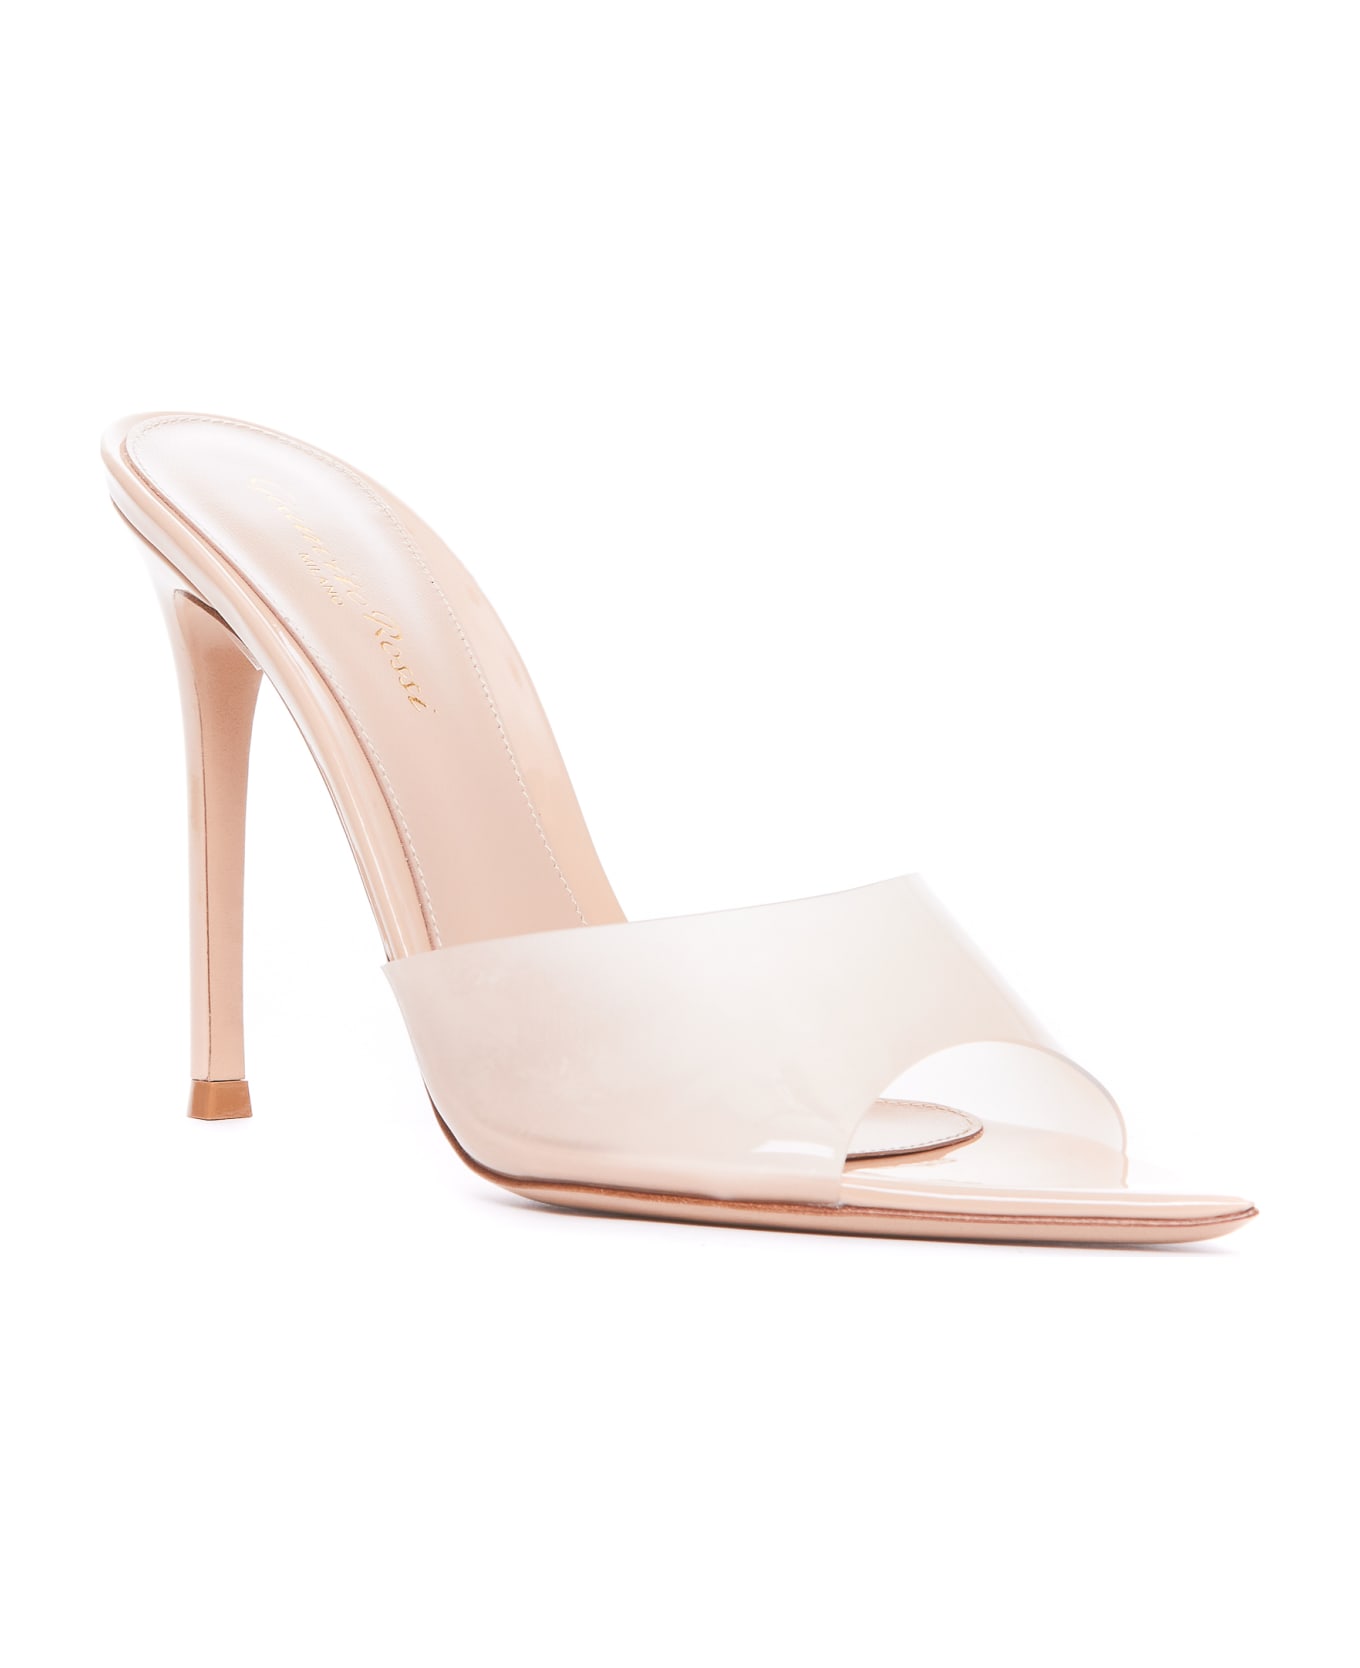 Gianvito Rossi Elle Glass Sandals - Pink